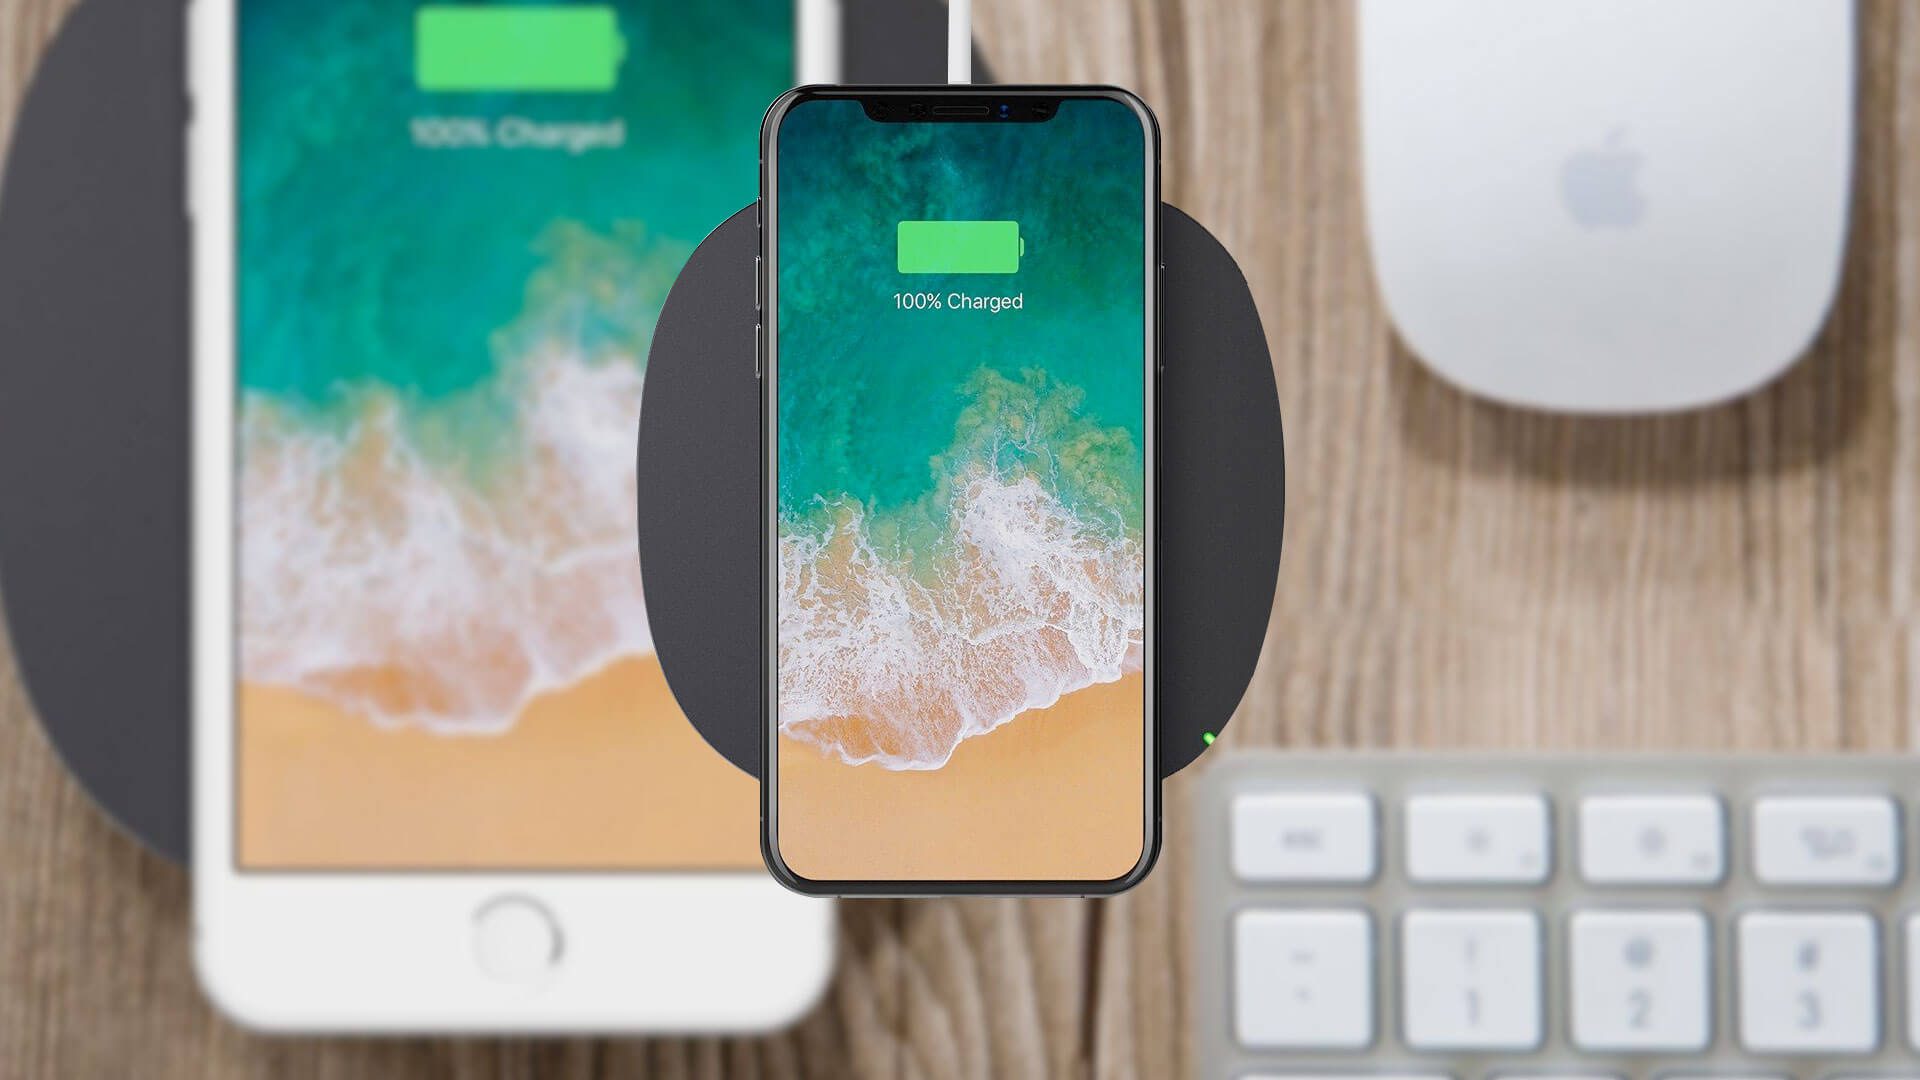 Best Wireless Chargers Under 30 Dollars for iPhone X, 8, and 8 Plus